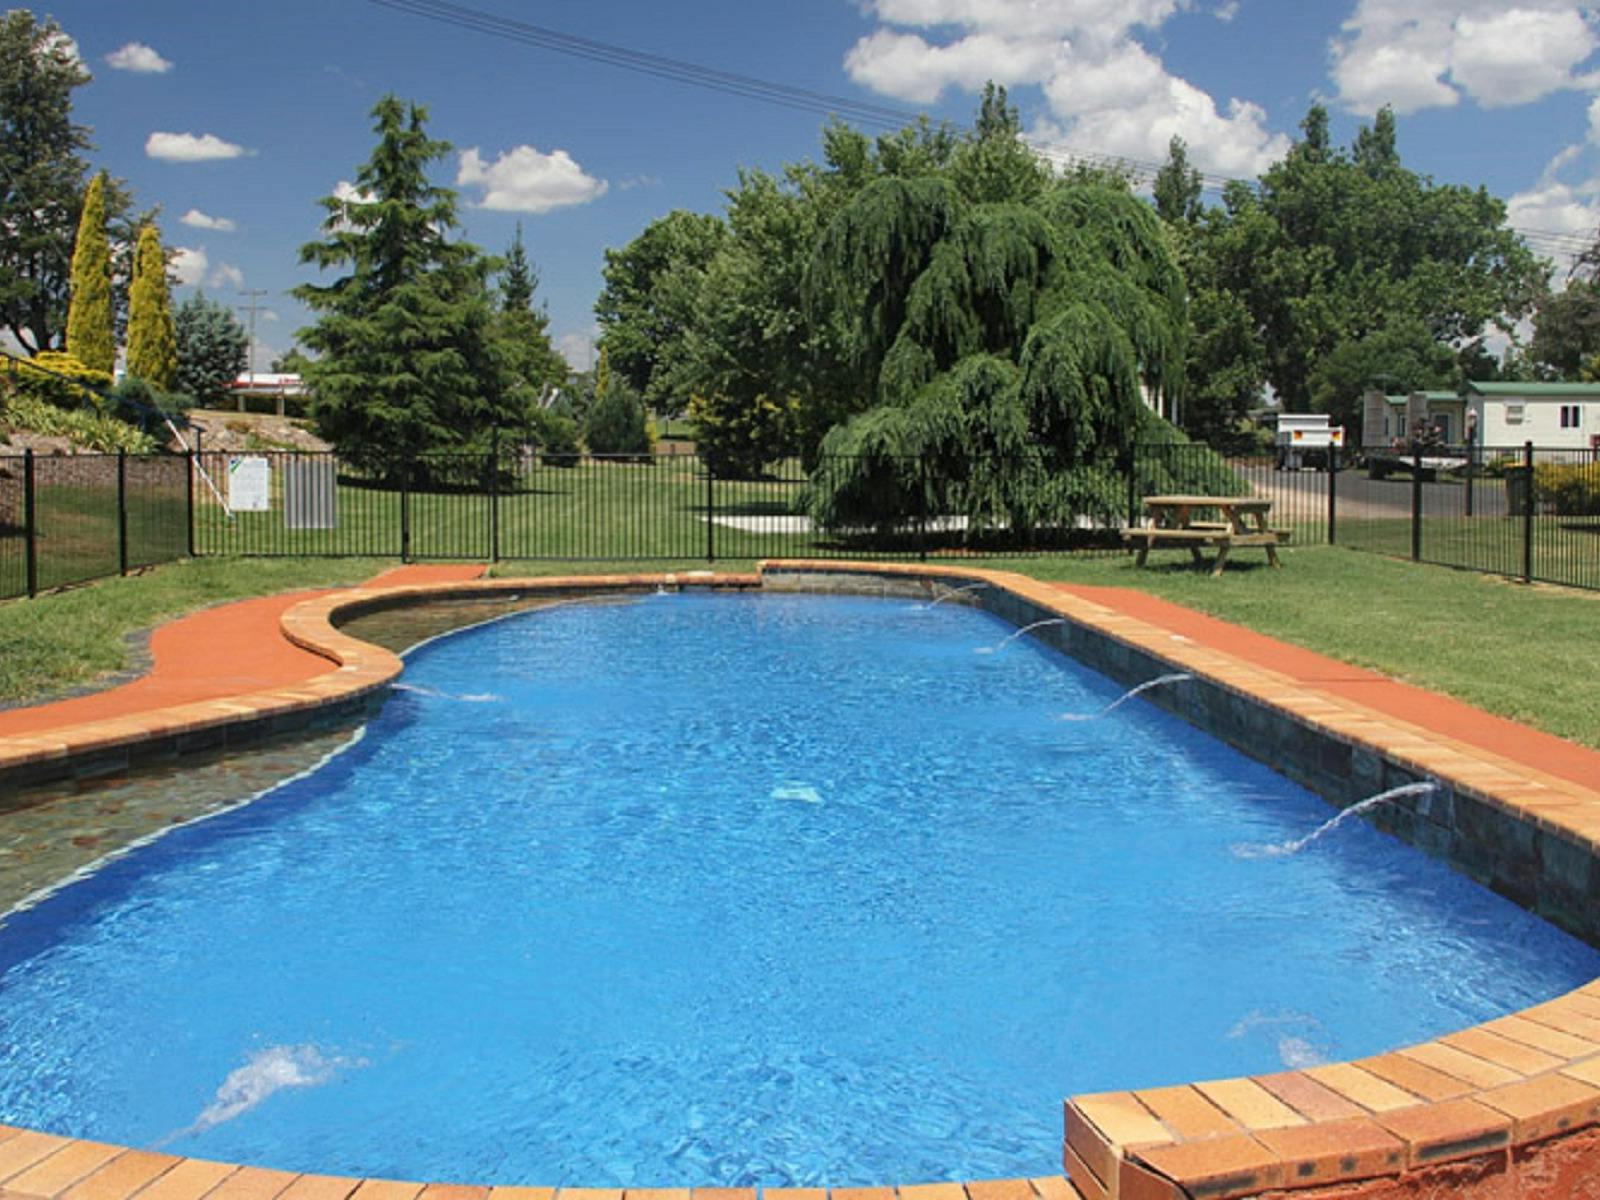 Swimming Pool in foregroung. Green lawn and trees in background.